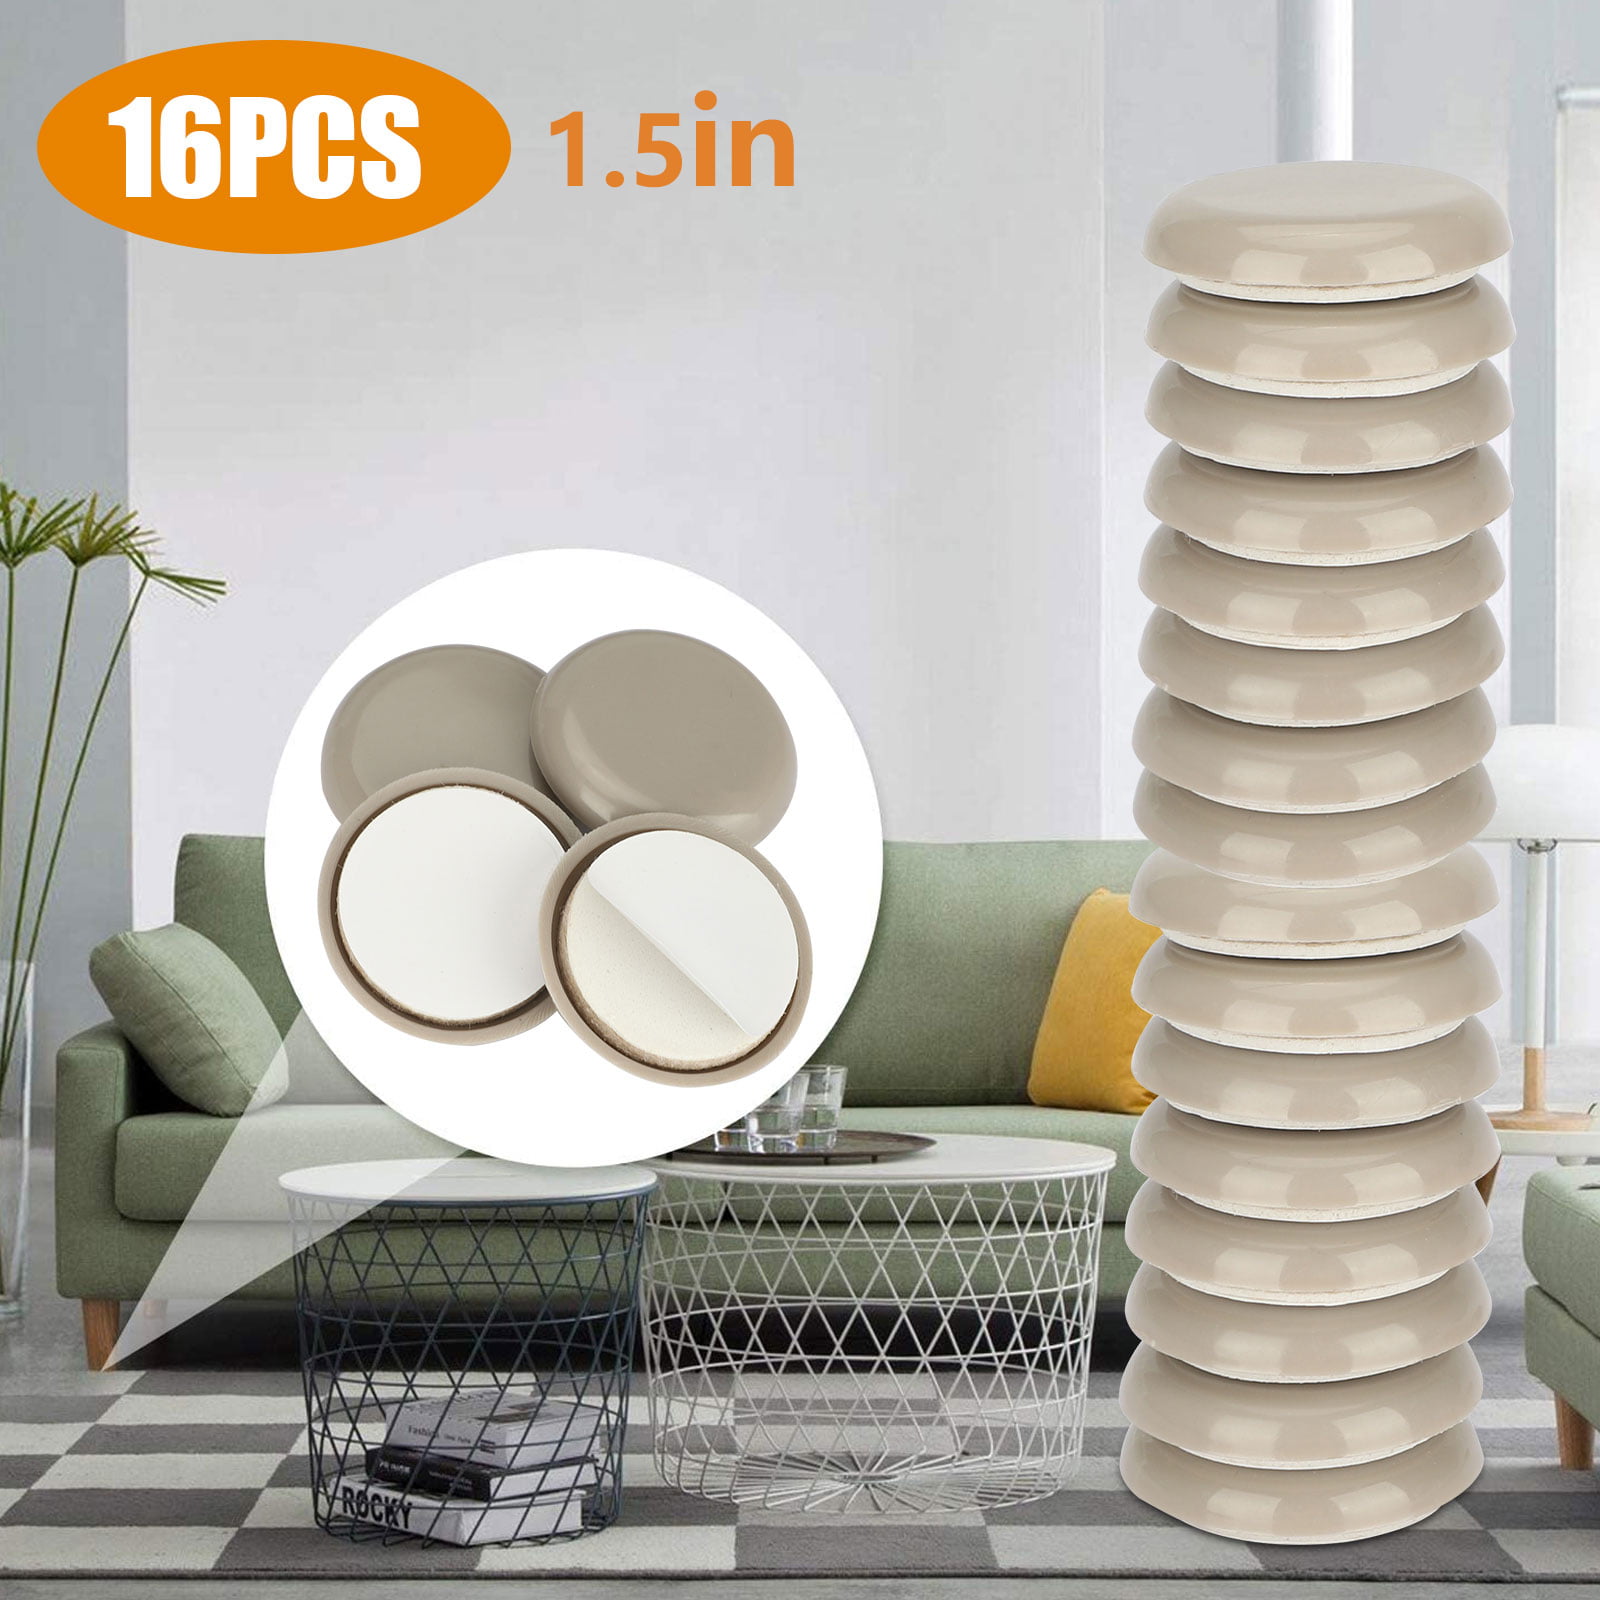 16x Reusable 3.5" Round Sliders for Carpet Move Heavy Furniture Quickly & Easily 